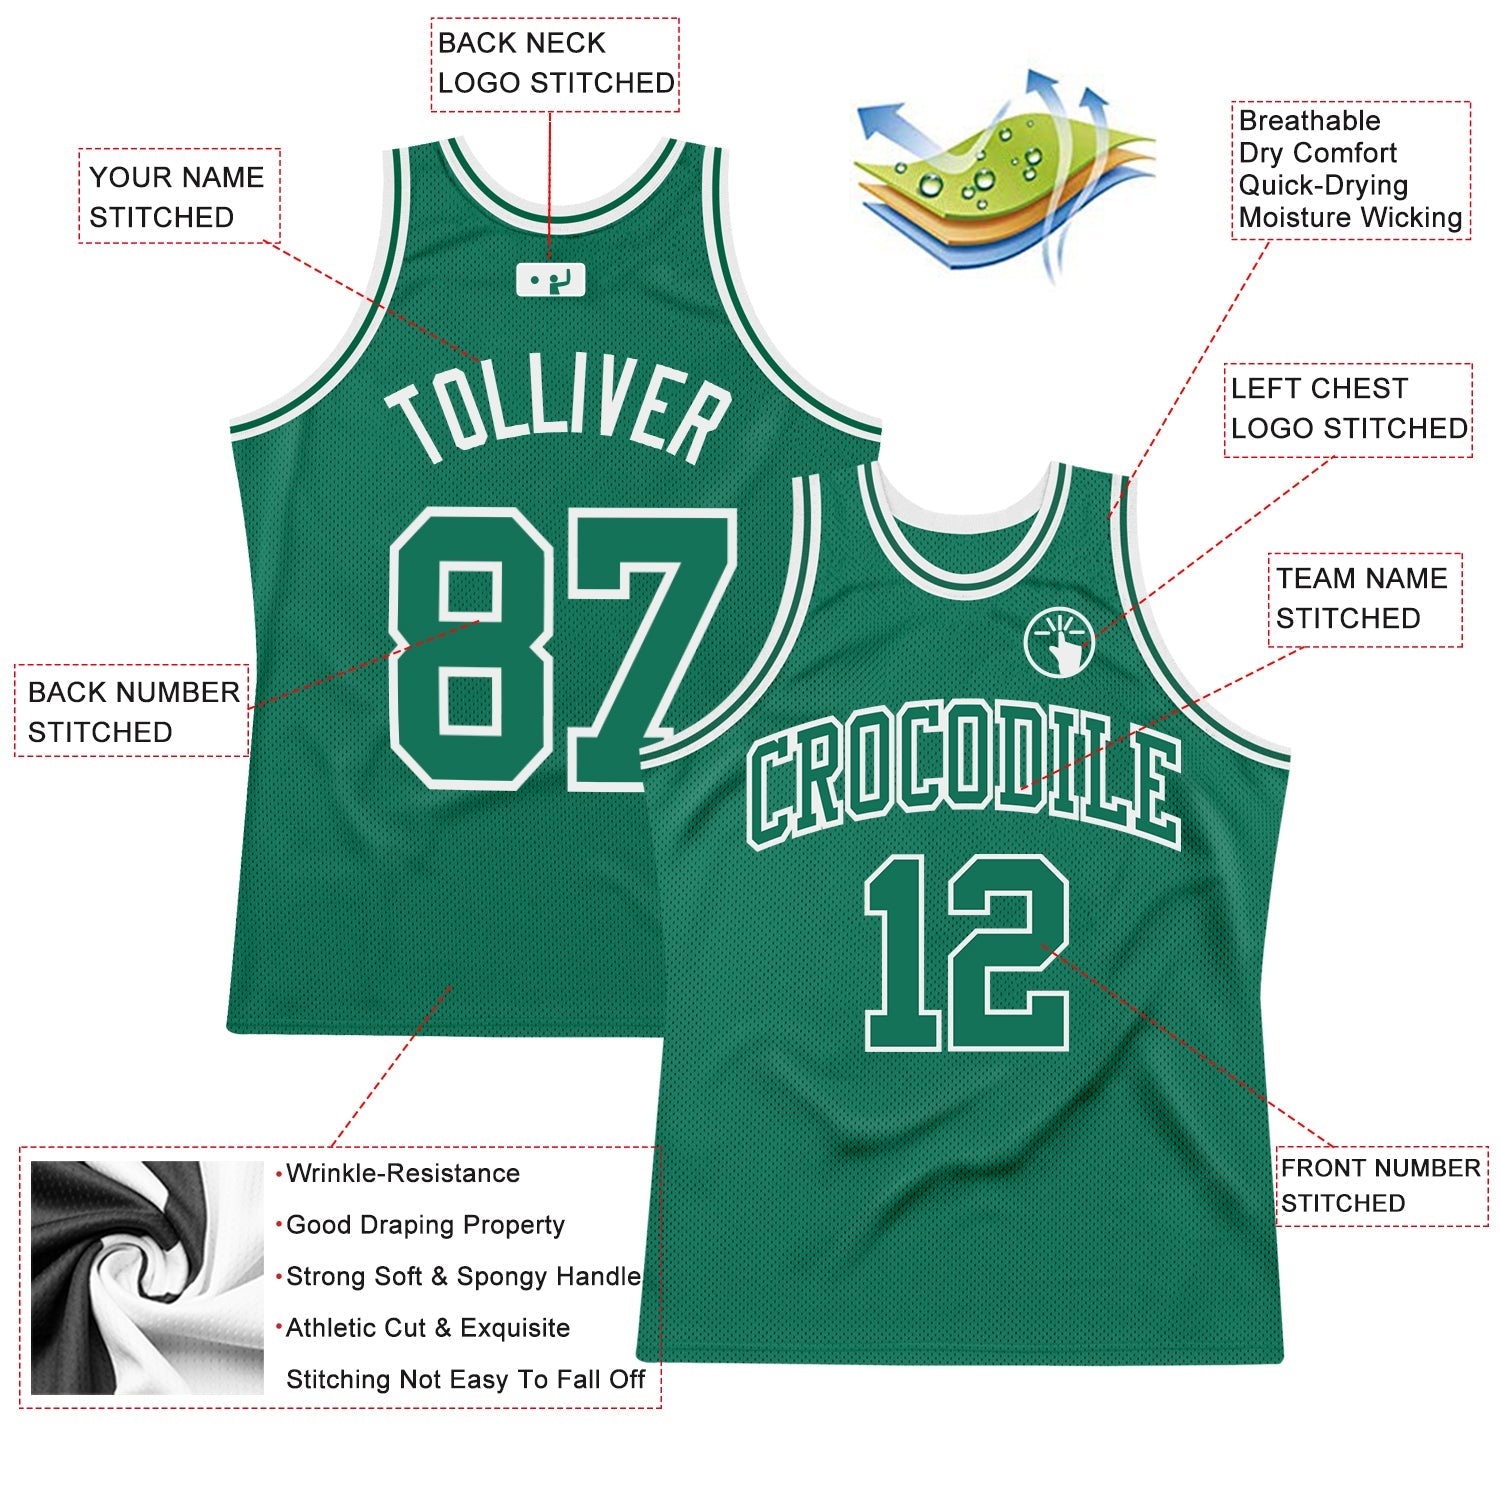 Custom Kelly Green Kelly Green-White Authentic Throwback Basketball Jersey